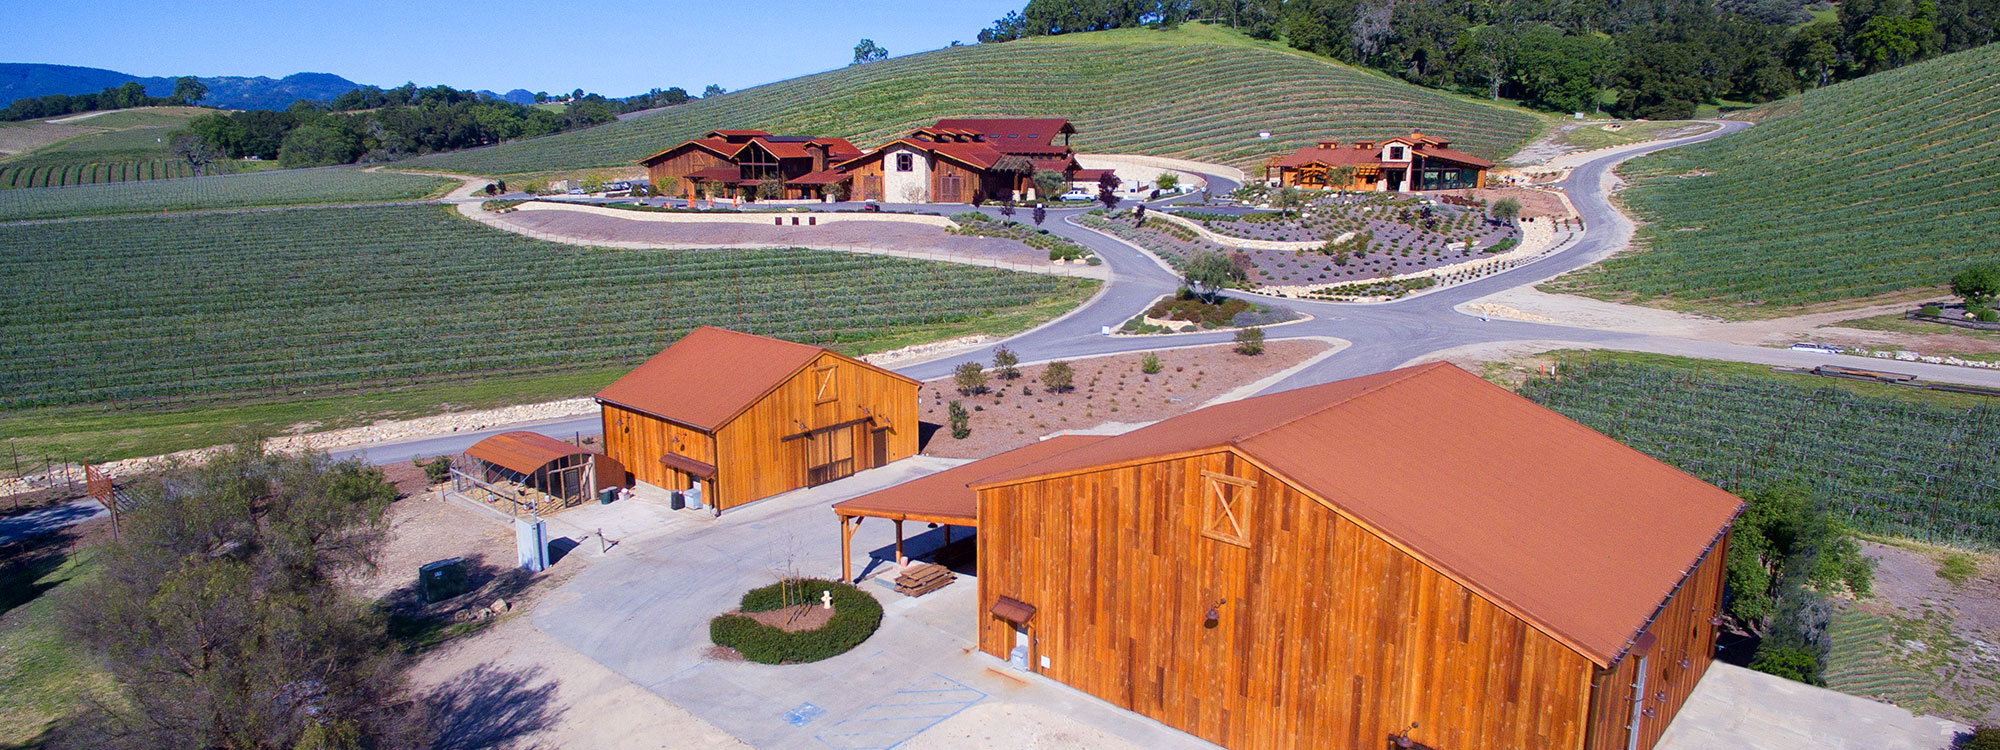 Paso Robles Contractor - Winery Construction Crew - JW Design & Construction